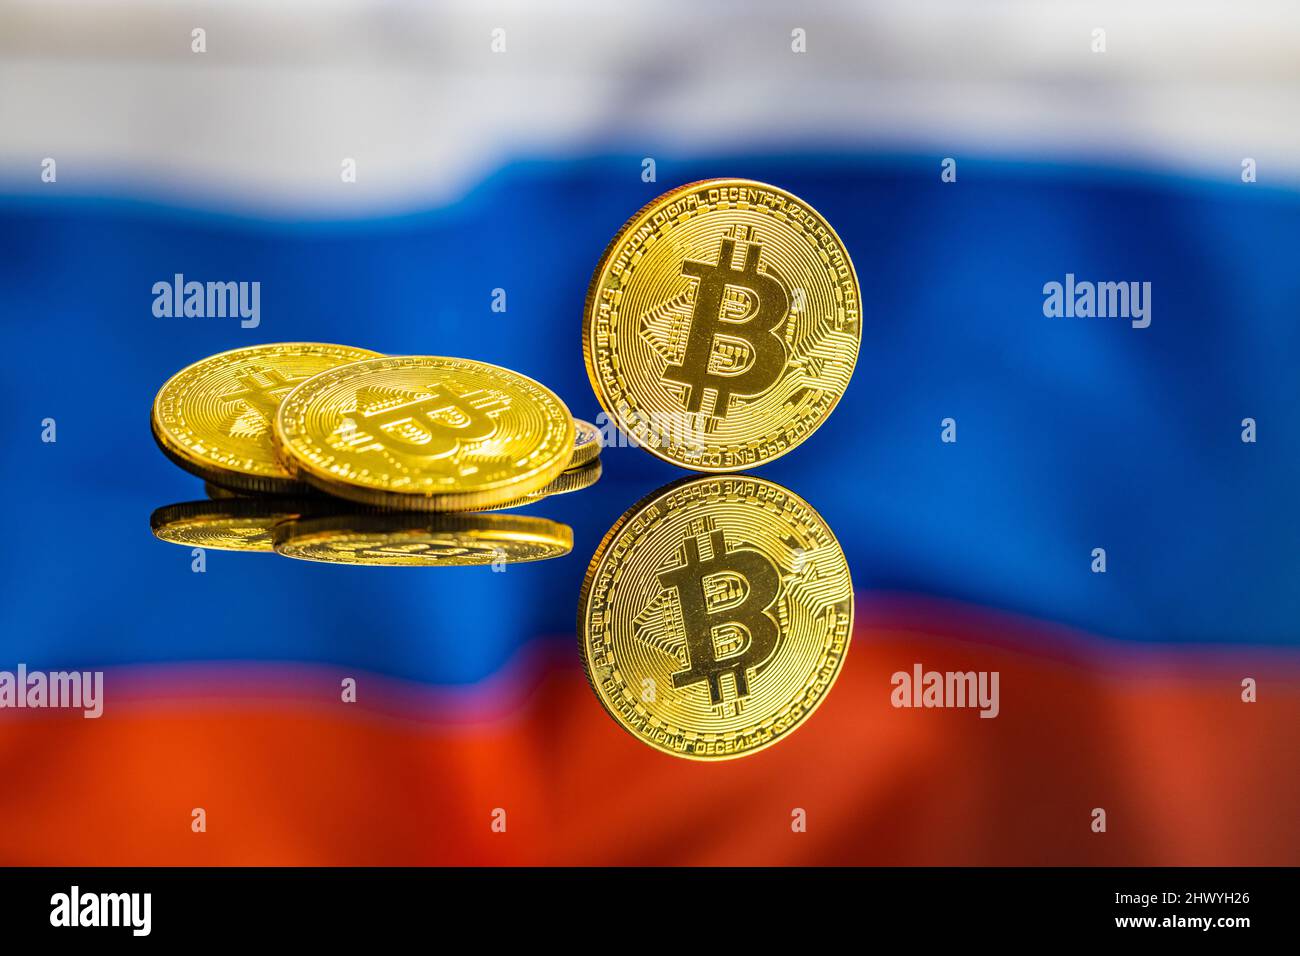 Bitcoin in front of russian flag. Digital cryptocurrency. The russian flag background. Stock Photo